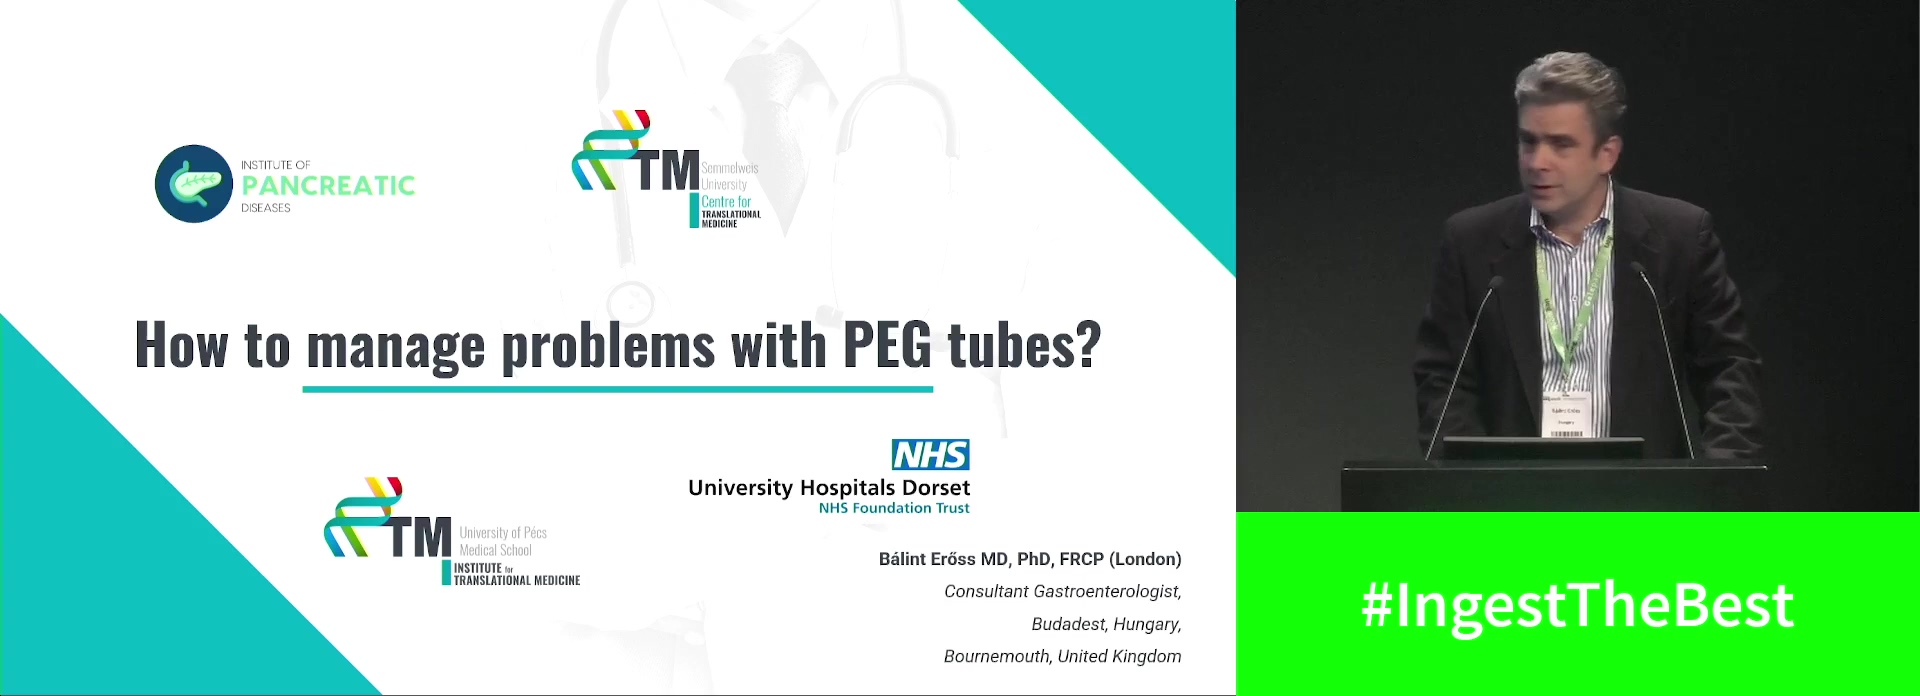 Malnutrition, diarrhoe, obstipation, leakages, blockages an co: How to manage problems with PEG tubes?